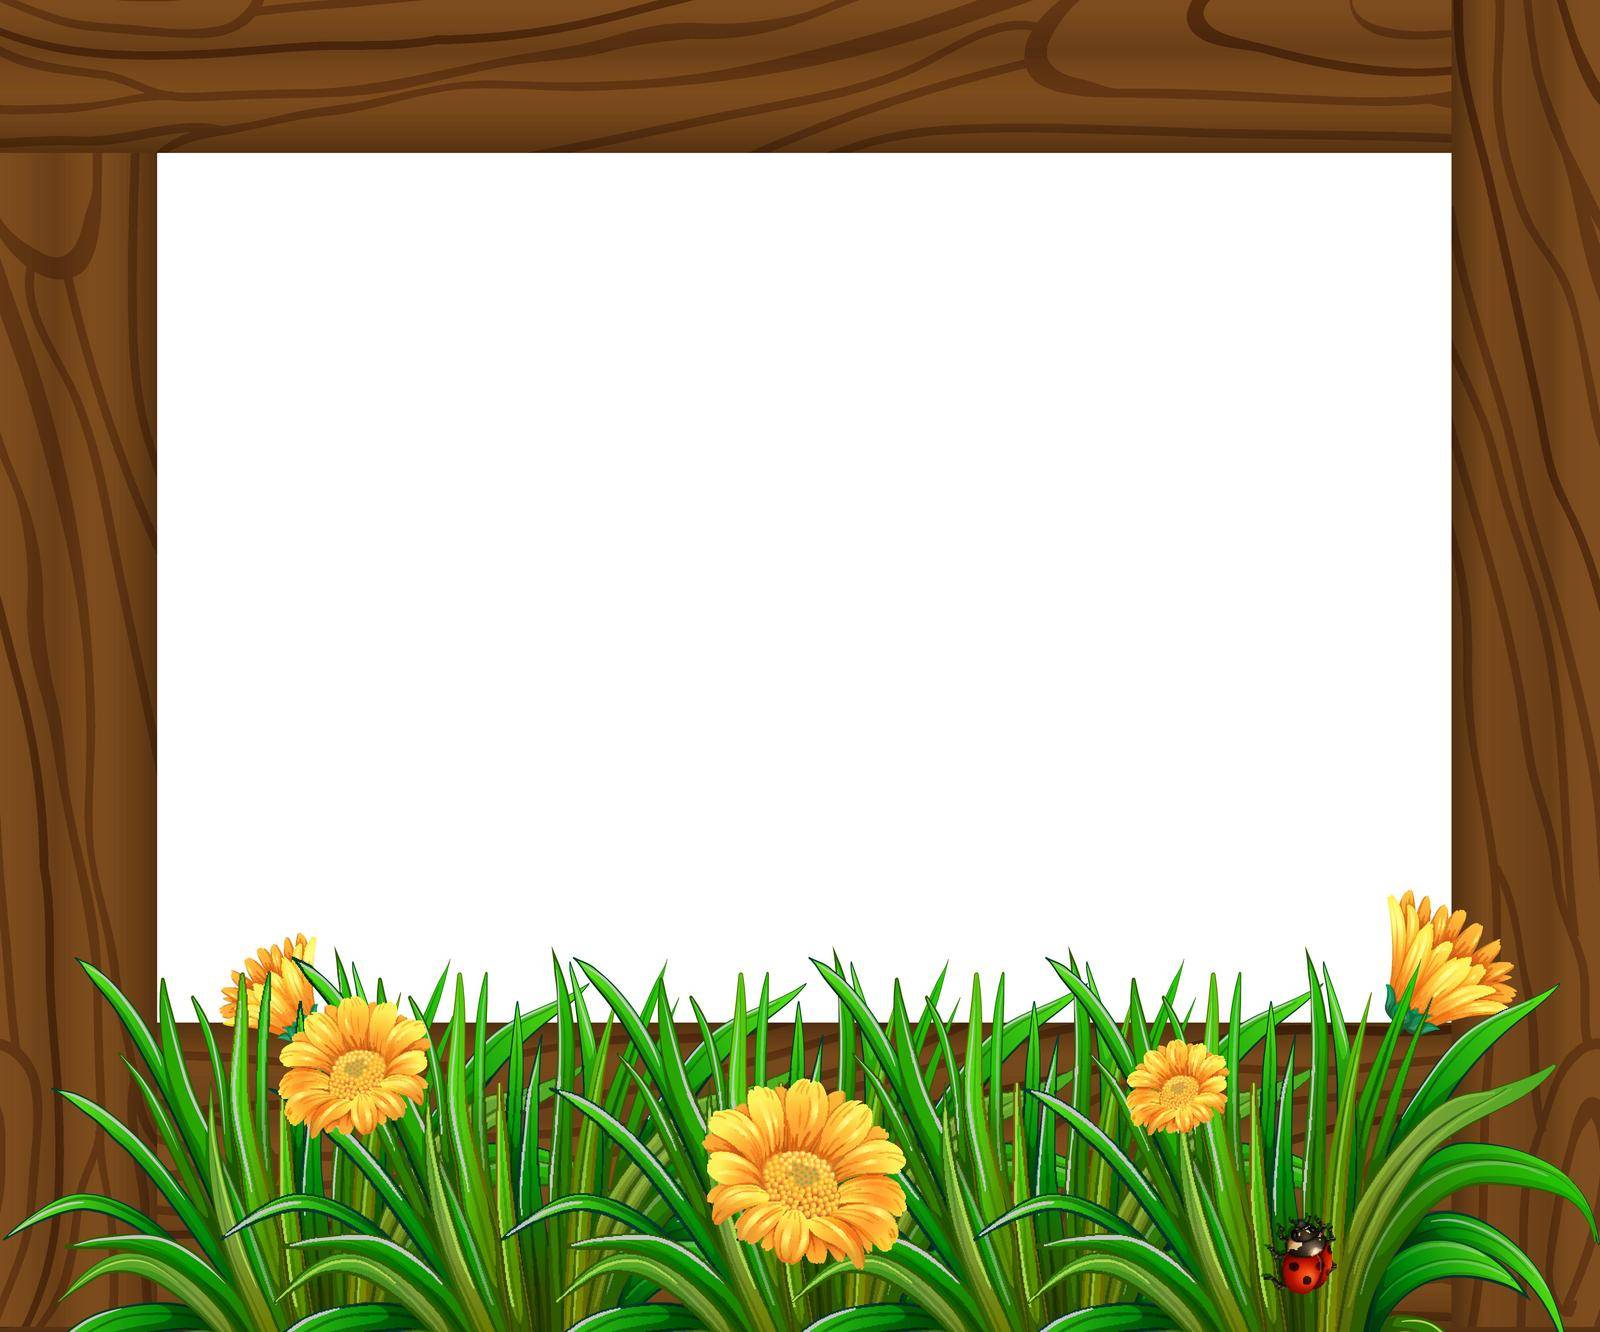 Square wooden frame with flowers and ladybug